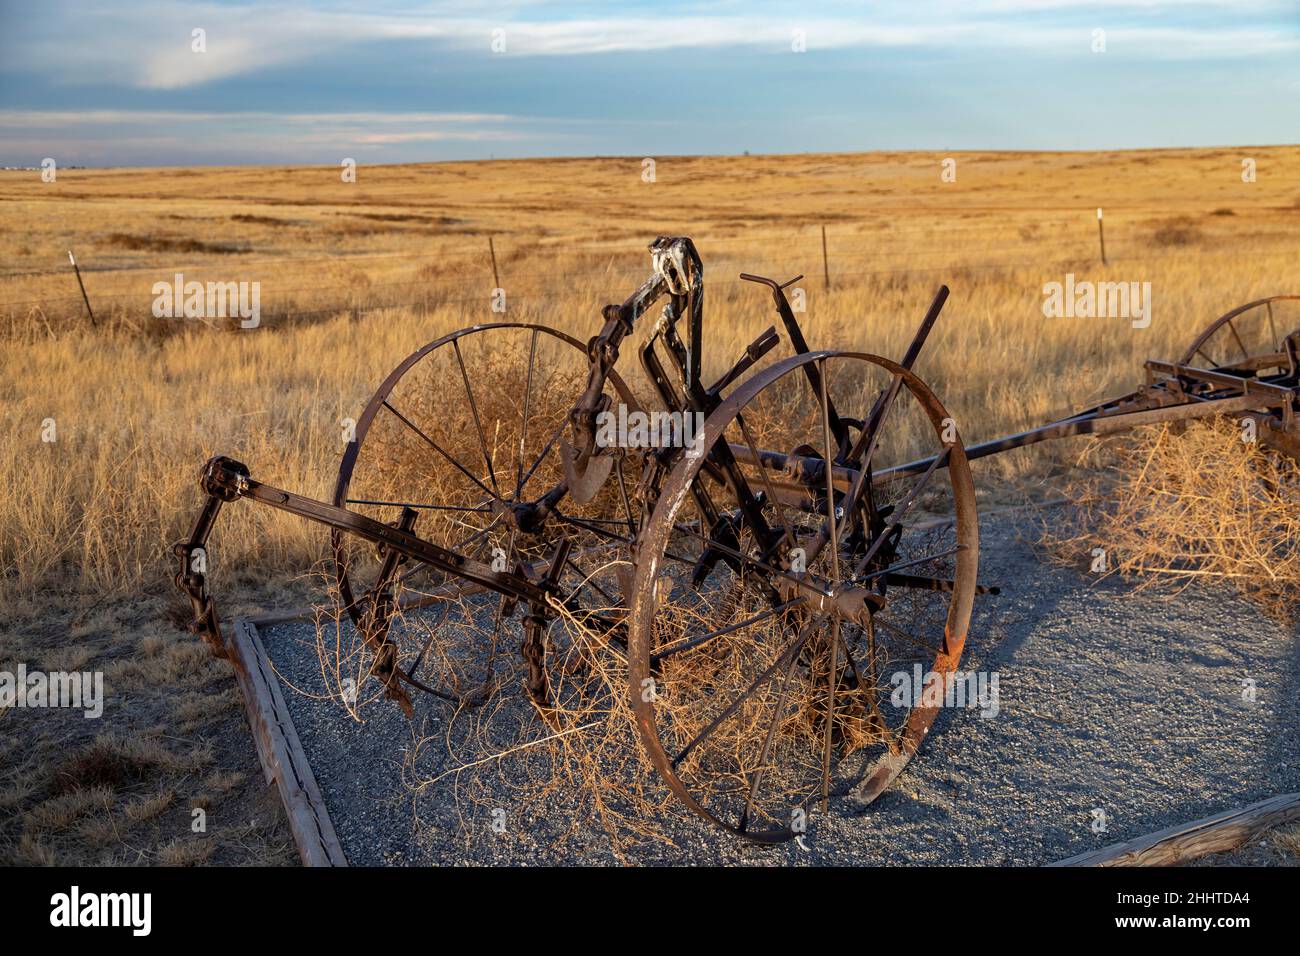 Aurora, Colorado - Homesteaders' farm implements at the Plains Conservation Center. The Center is an 1100-acre remnant prairie preserve, with a replic Stock Photo